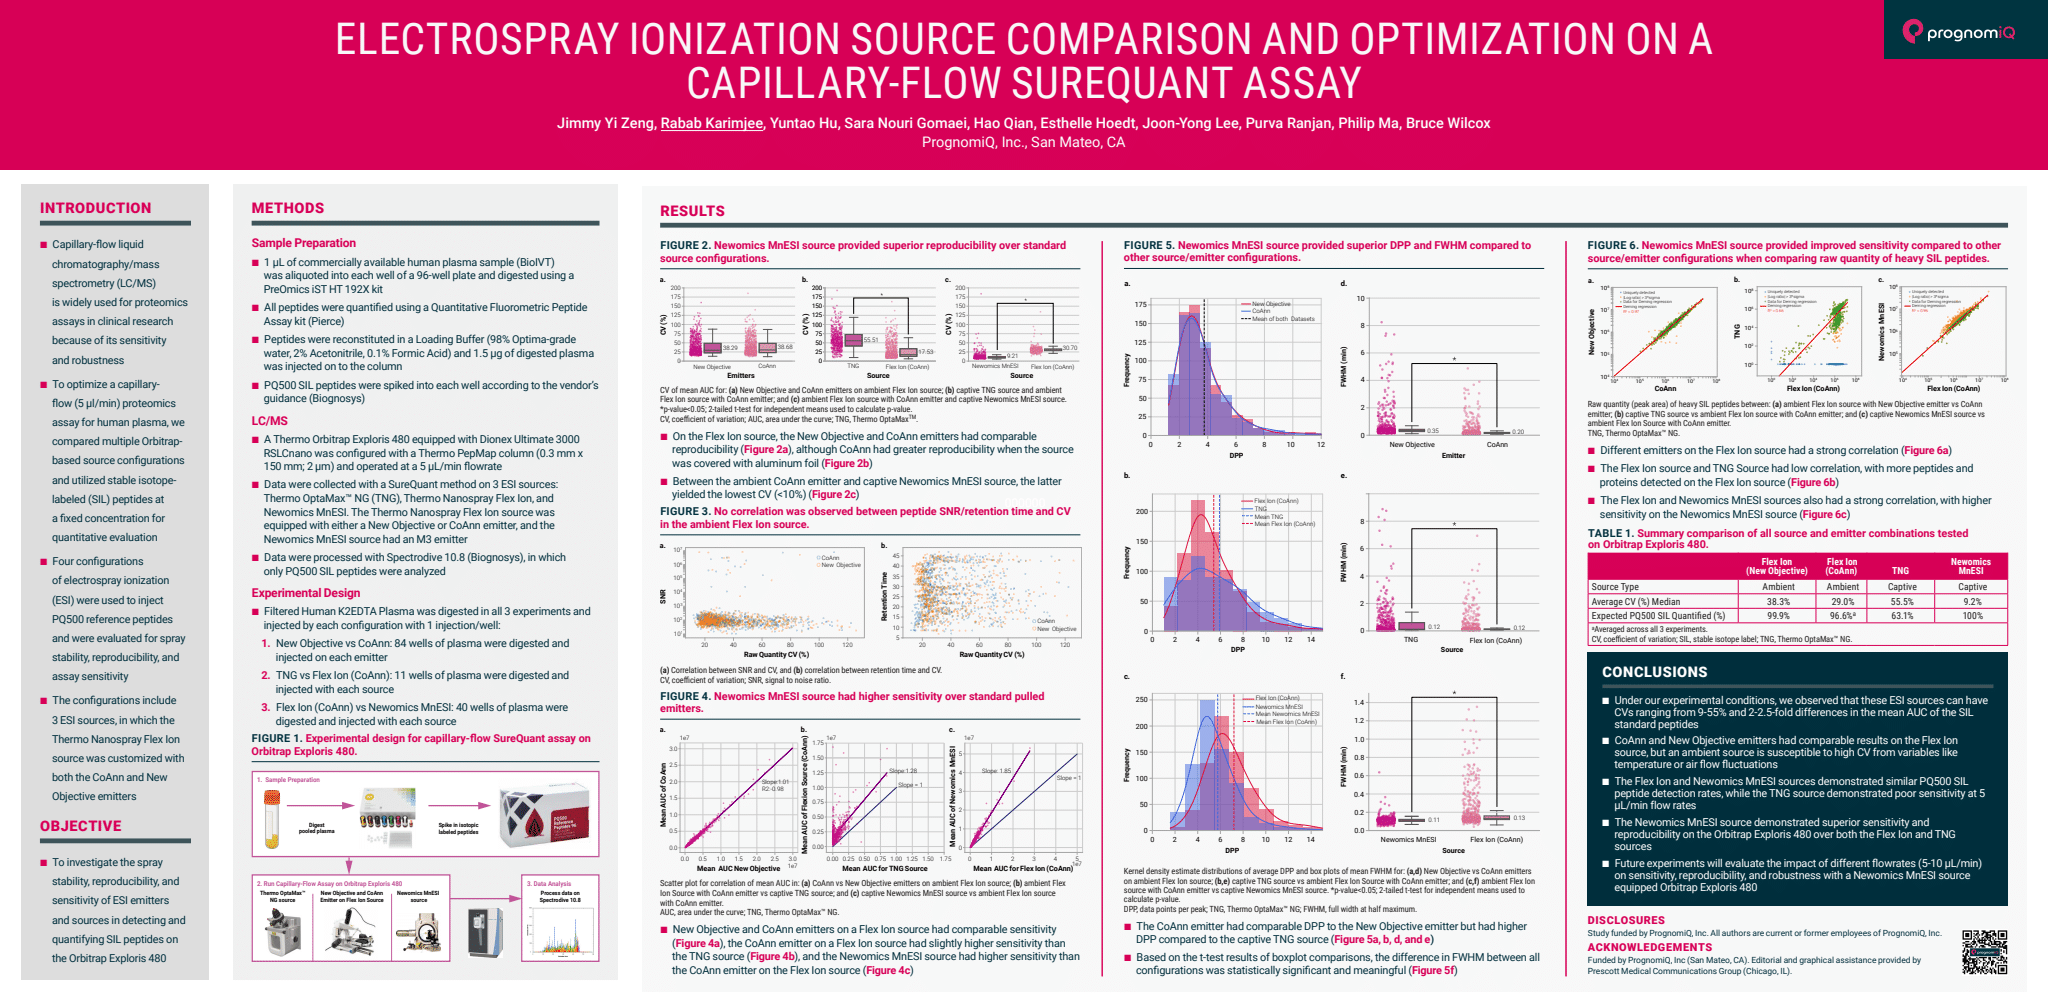 scientific poster showing a electrospray ionization source comparison and optimization on a capillary-flow surequant assay